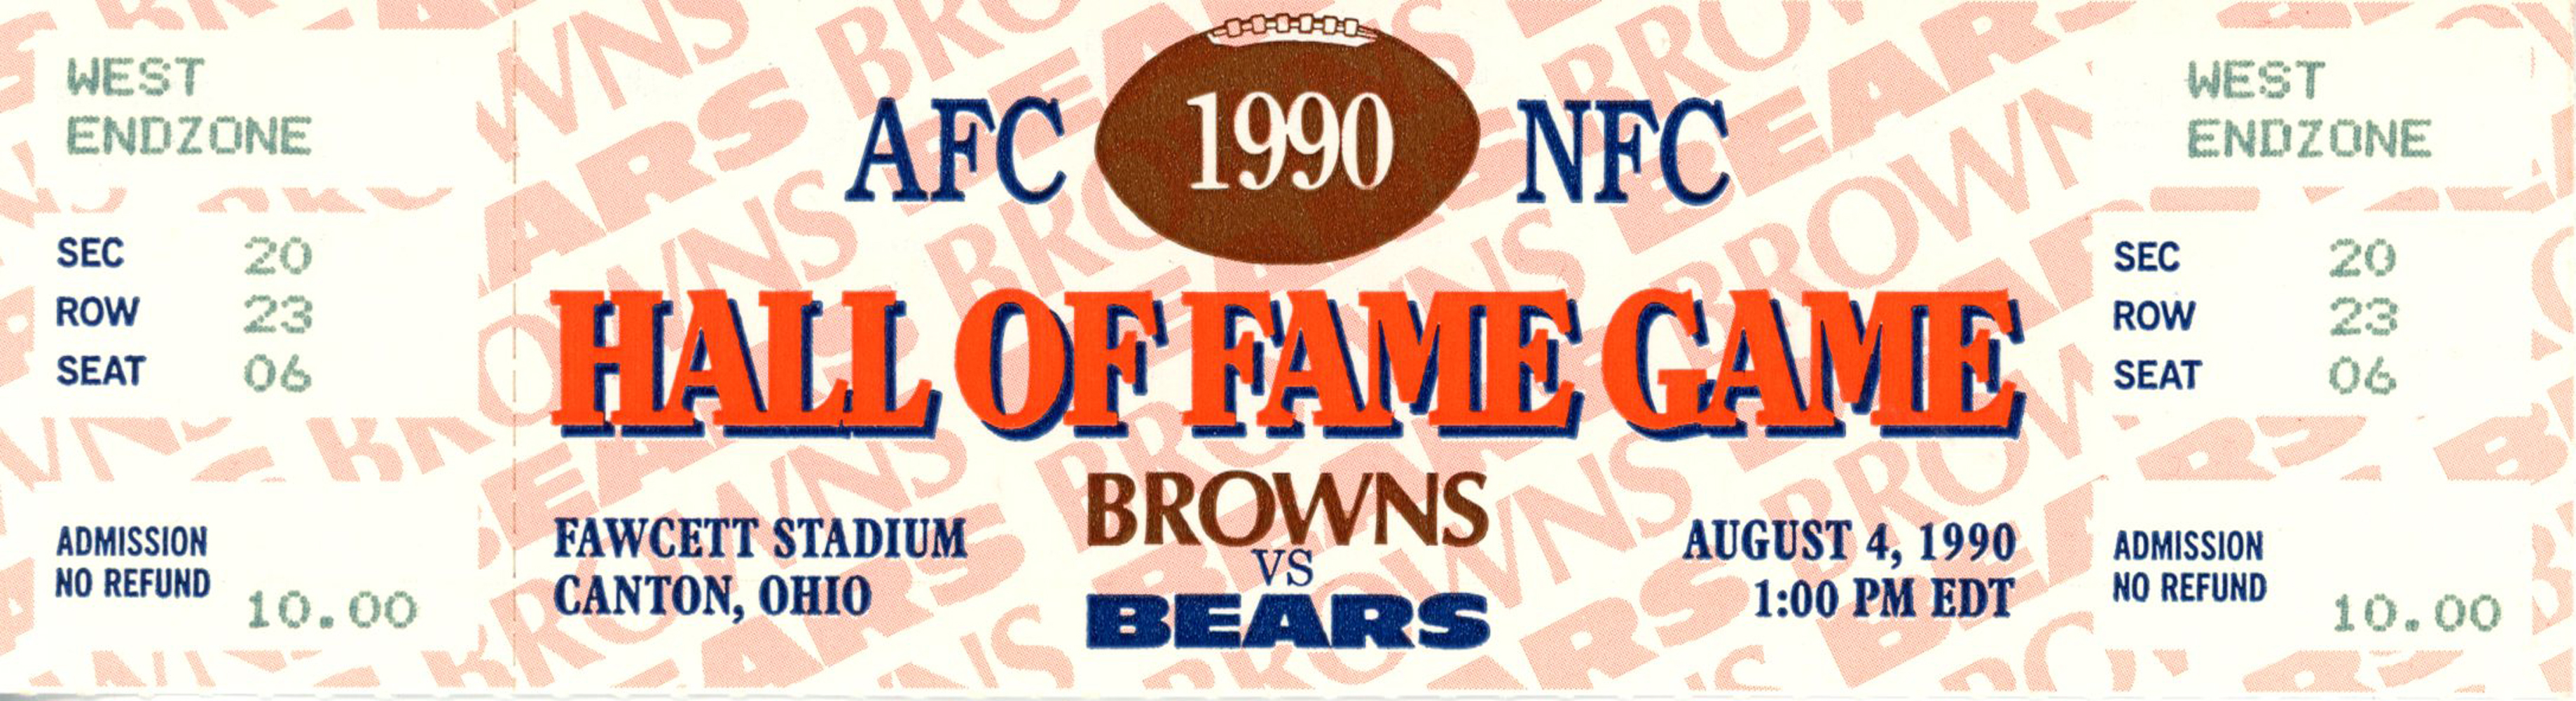 1990 Hall Of Fame Game Ticket Cleveland Browns vs Chicago Bears